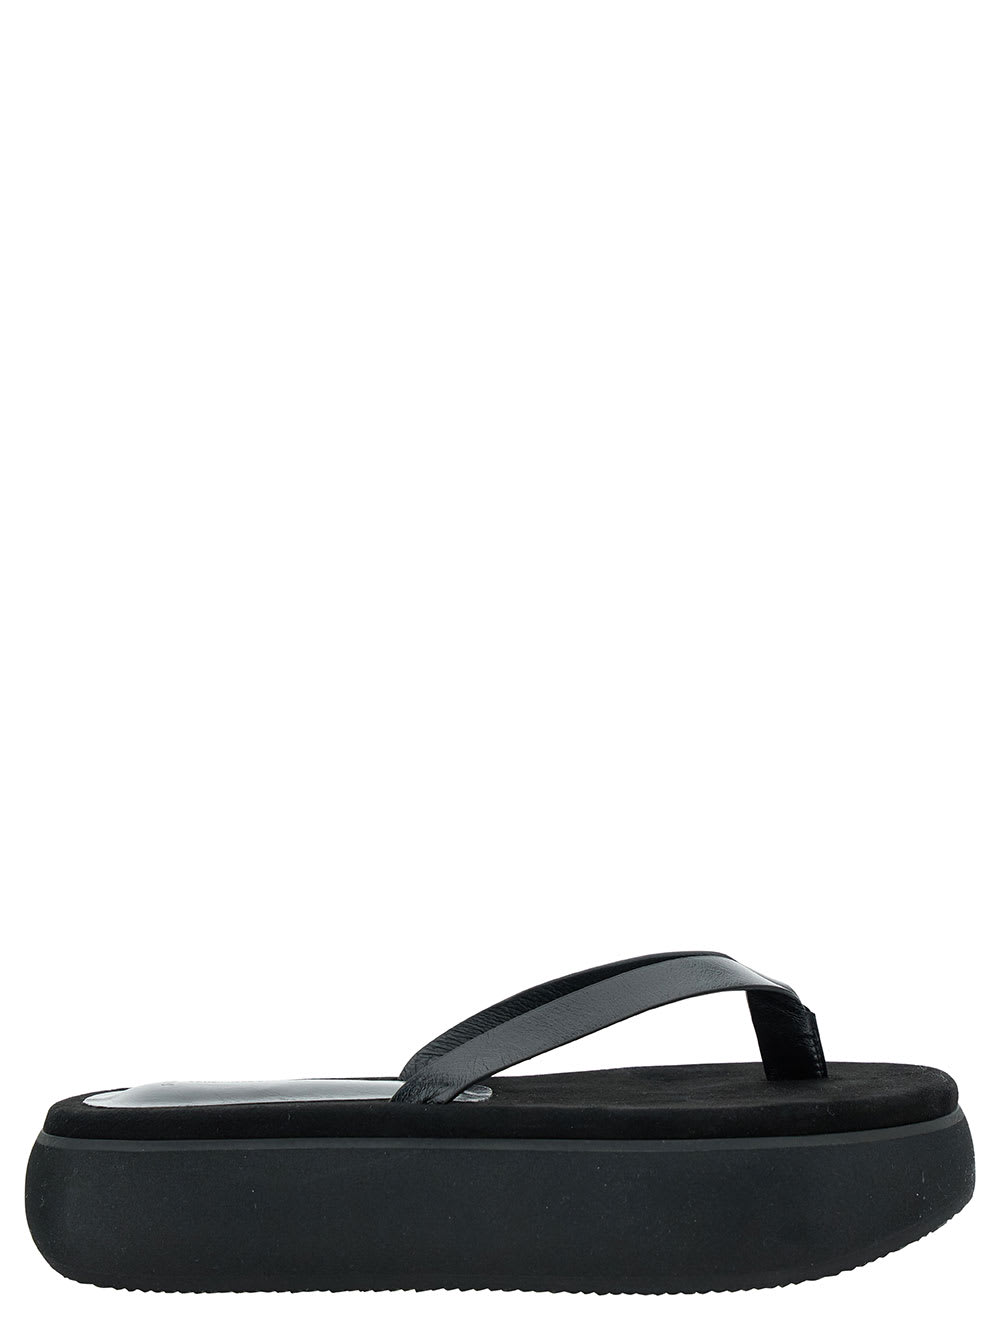 boat Black Flip Flops With Chunky Sole In Leather Woman